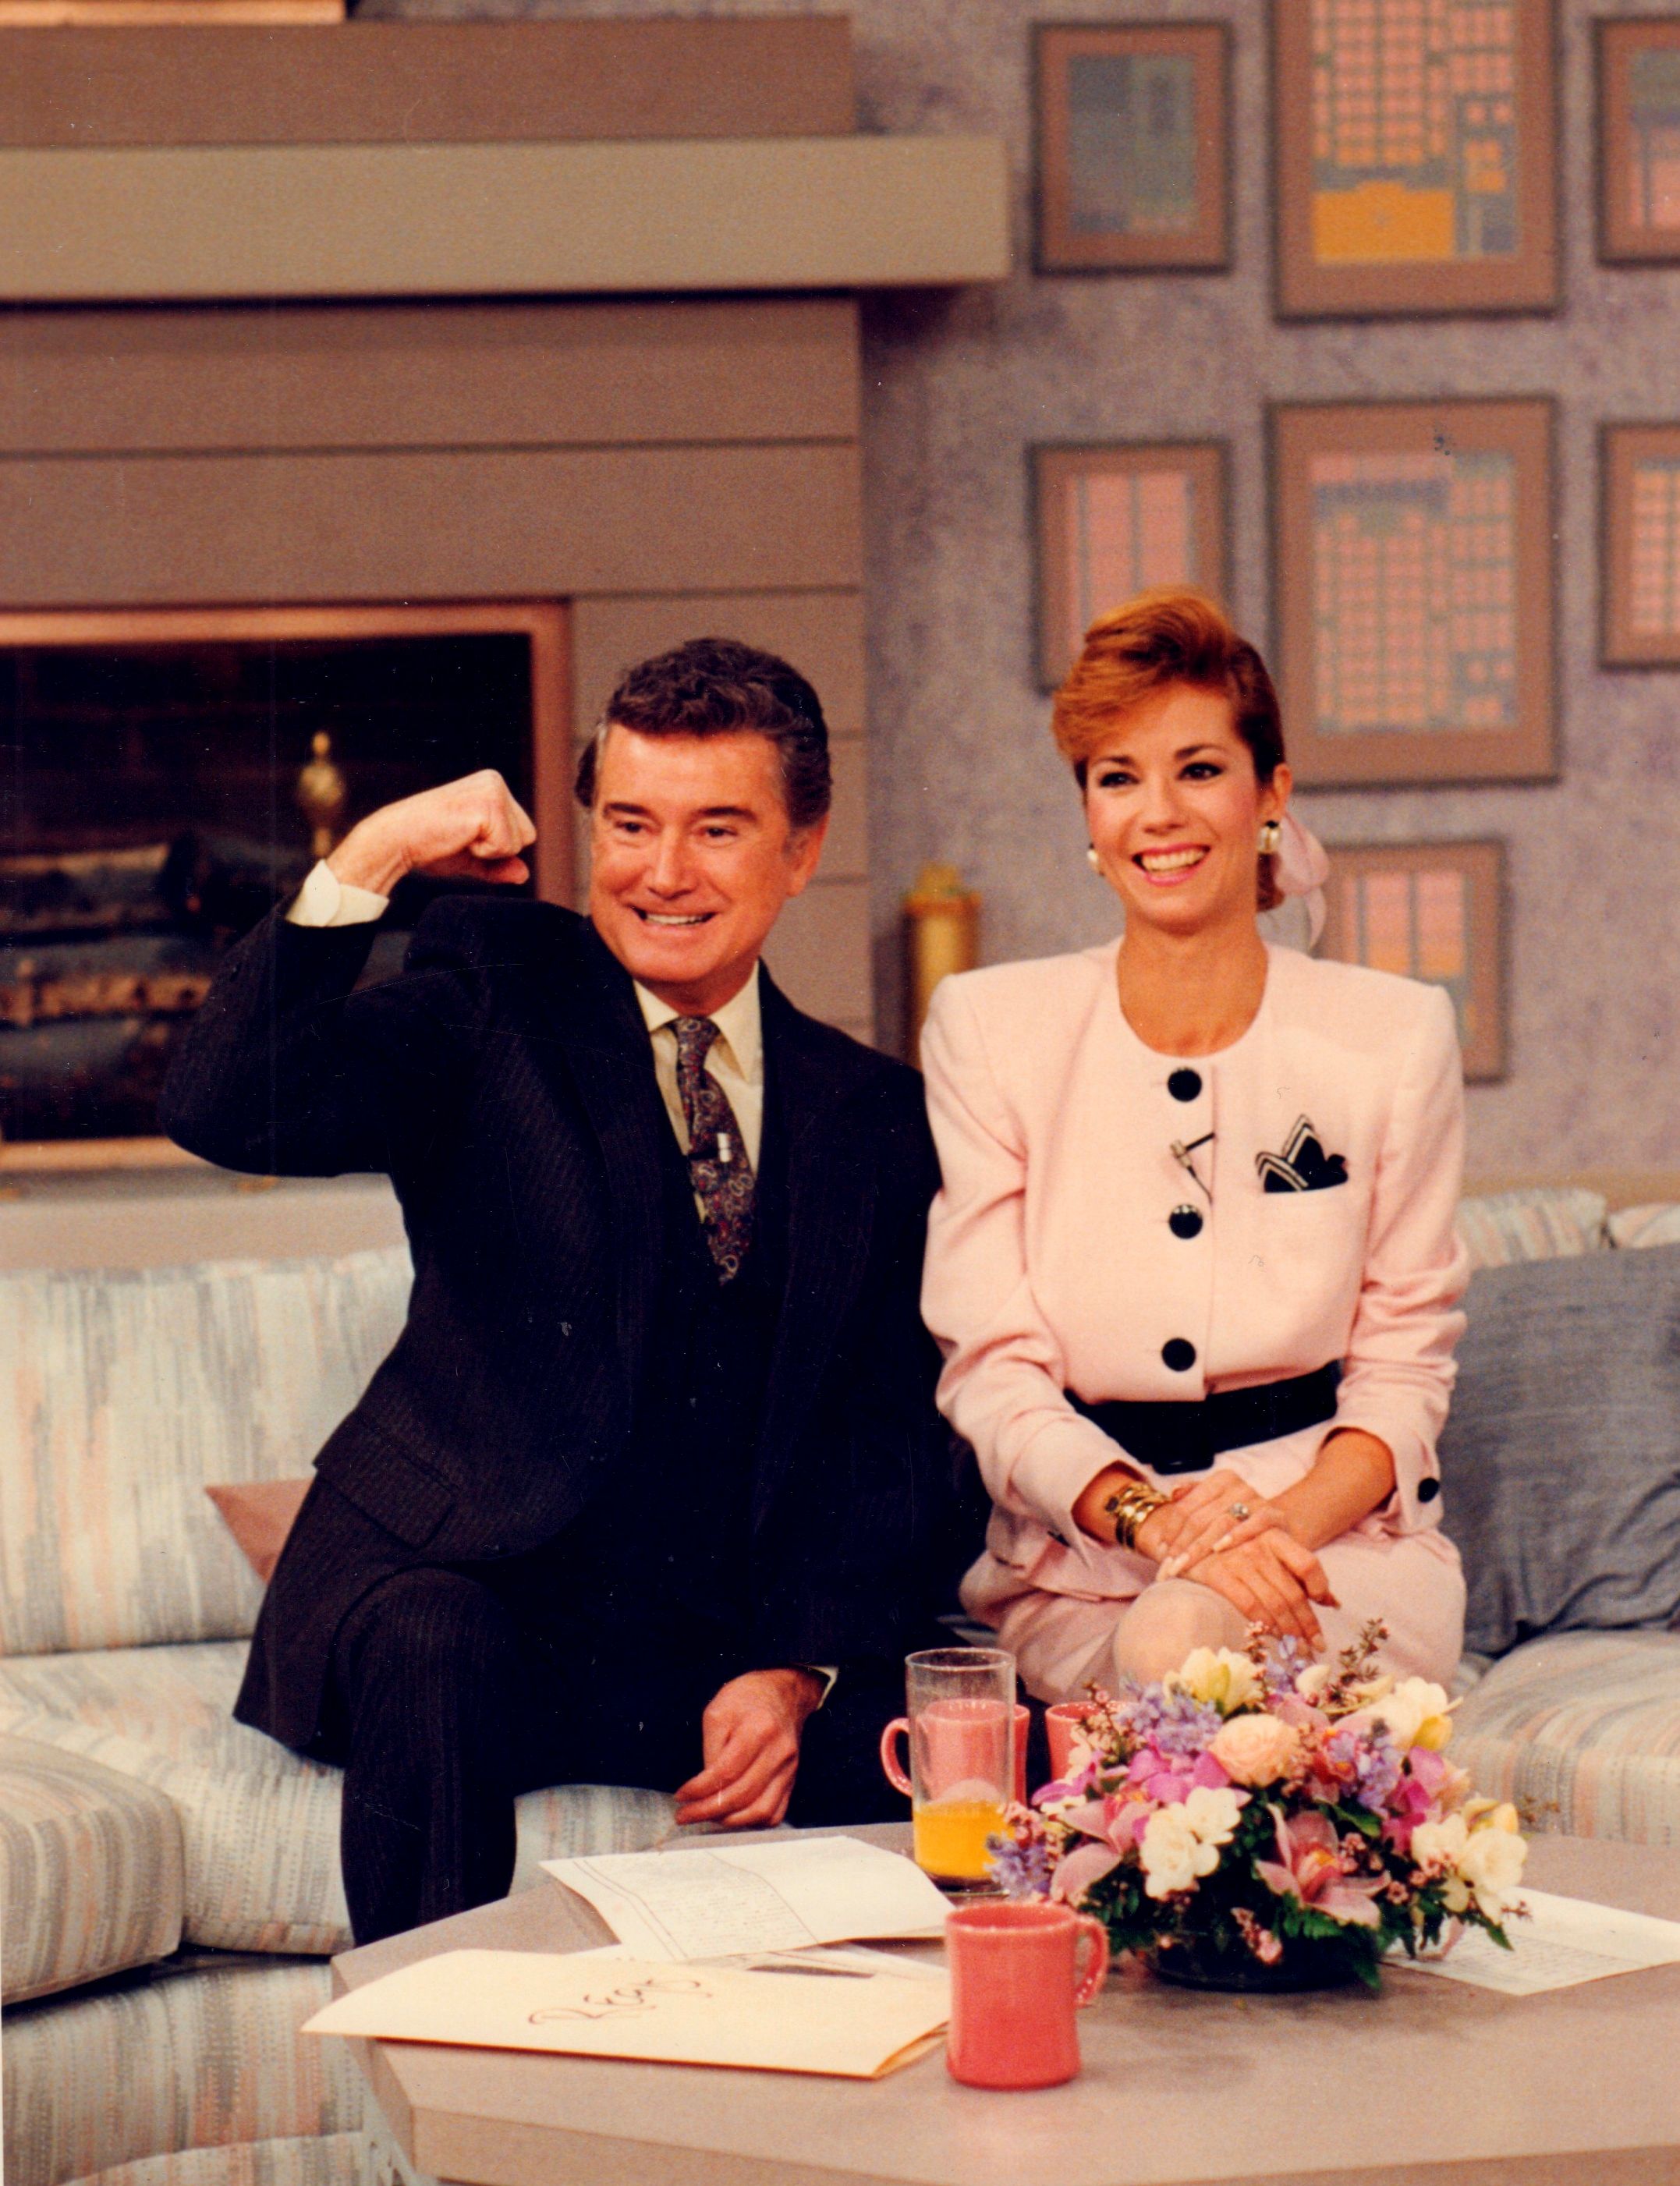 Regis Philbin and Kathie Lee Gifford on the set of "Live! with Regis and Kathie Lee" in New York on April 25, 1988. | Source: J. Michael Dombroski/Newsday RM/Getty Images